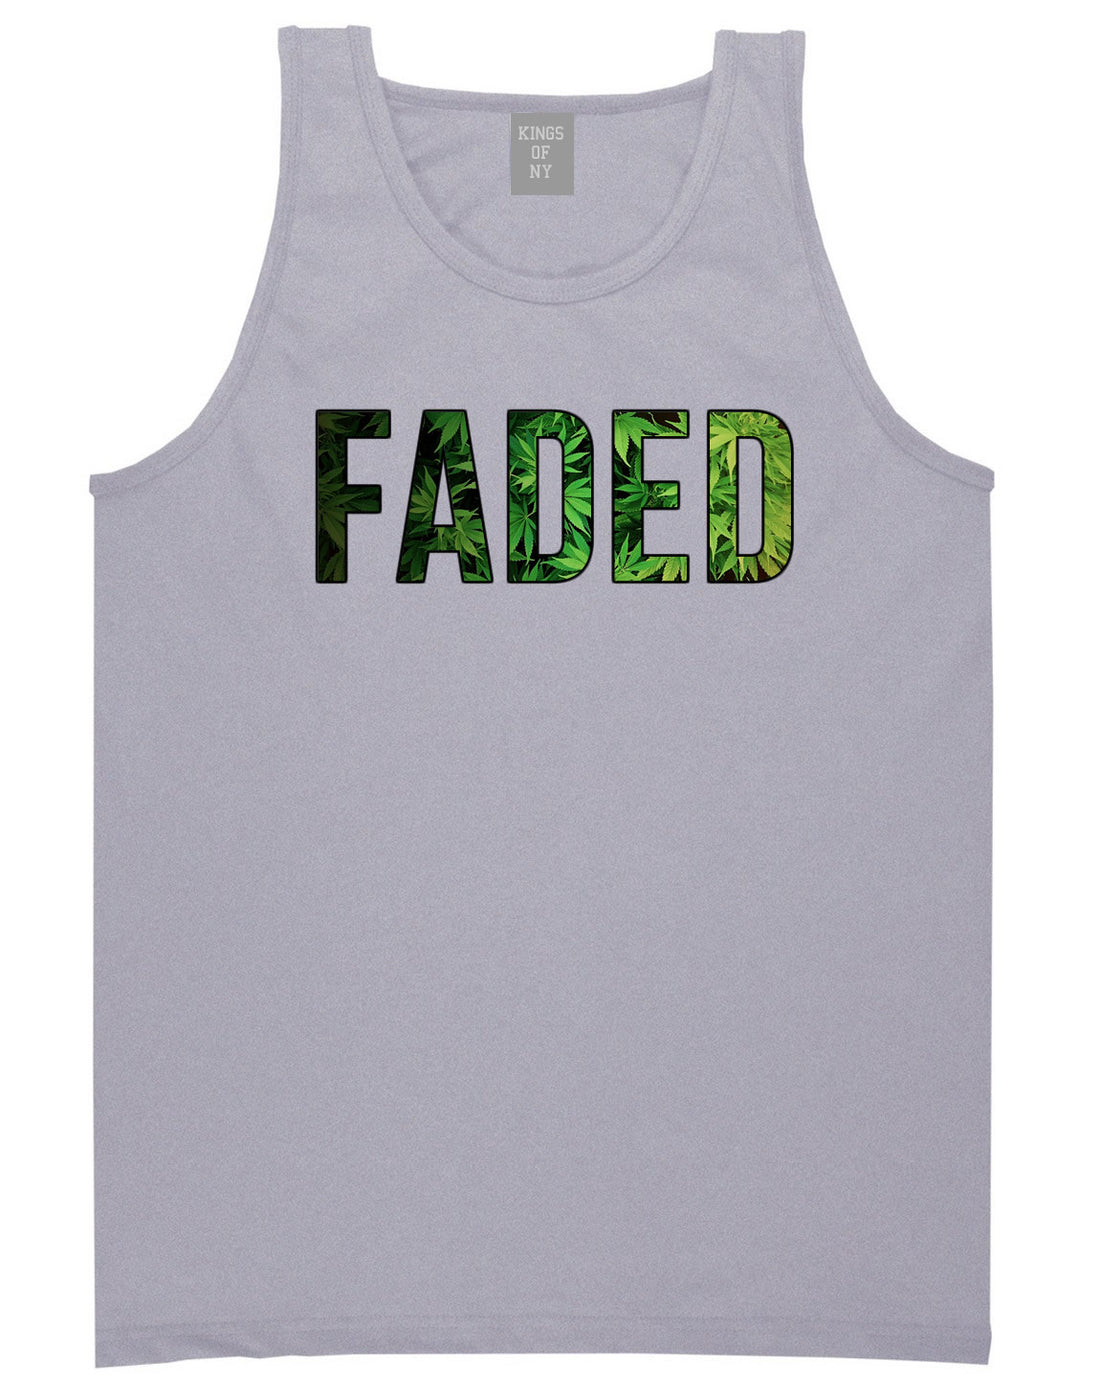 Faded Plant Life Marijuana Drugs Legalize Tank Top In Grey by Kings Of NY